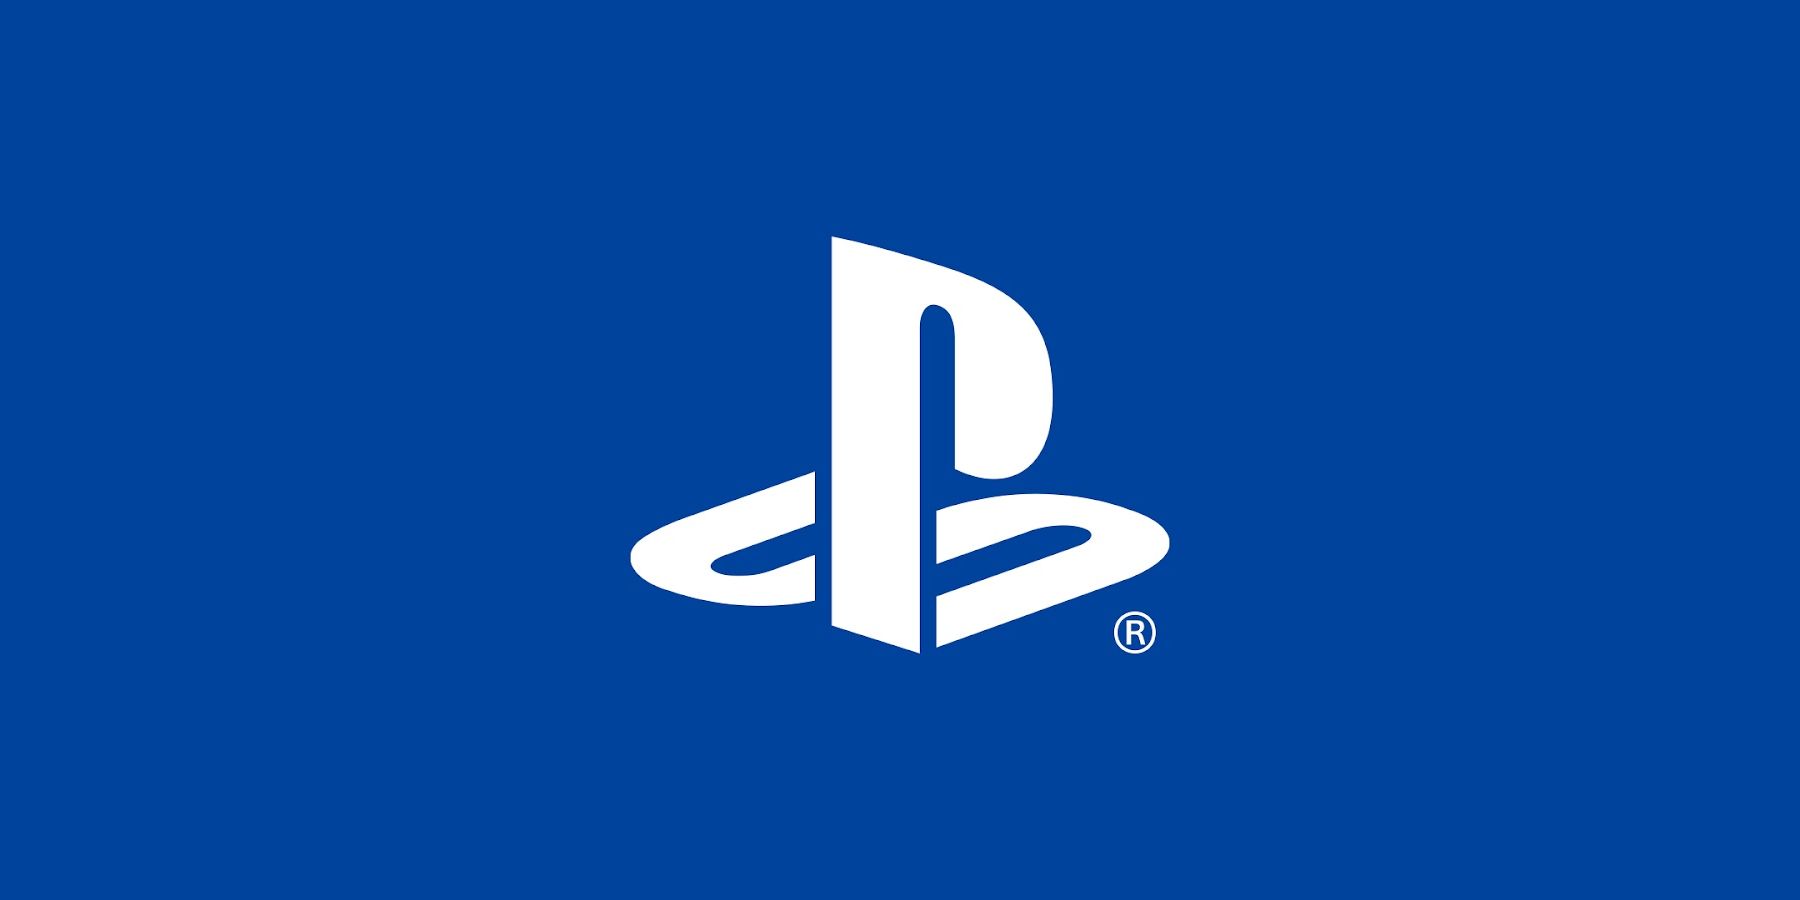 PS4 Update 10.50 is Available to Download Right Now